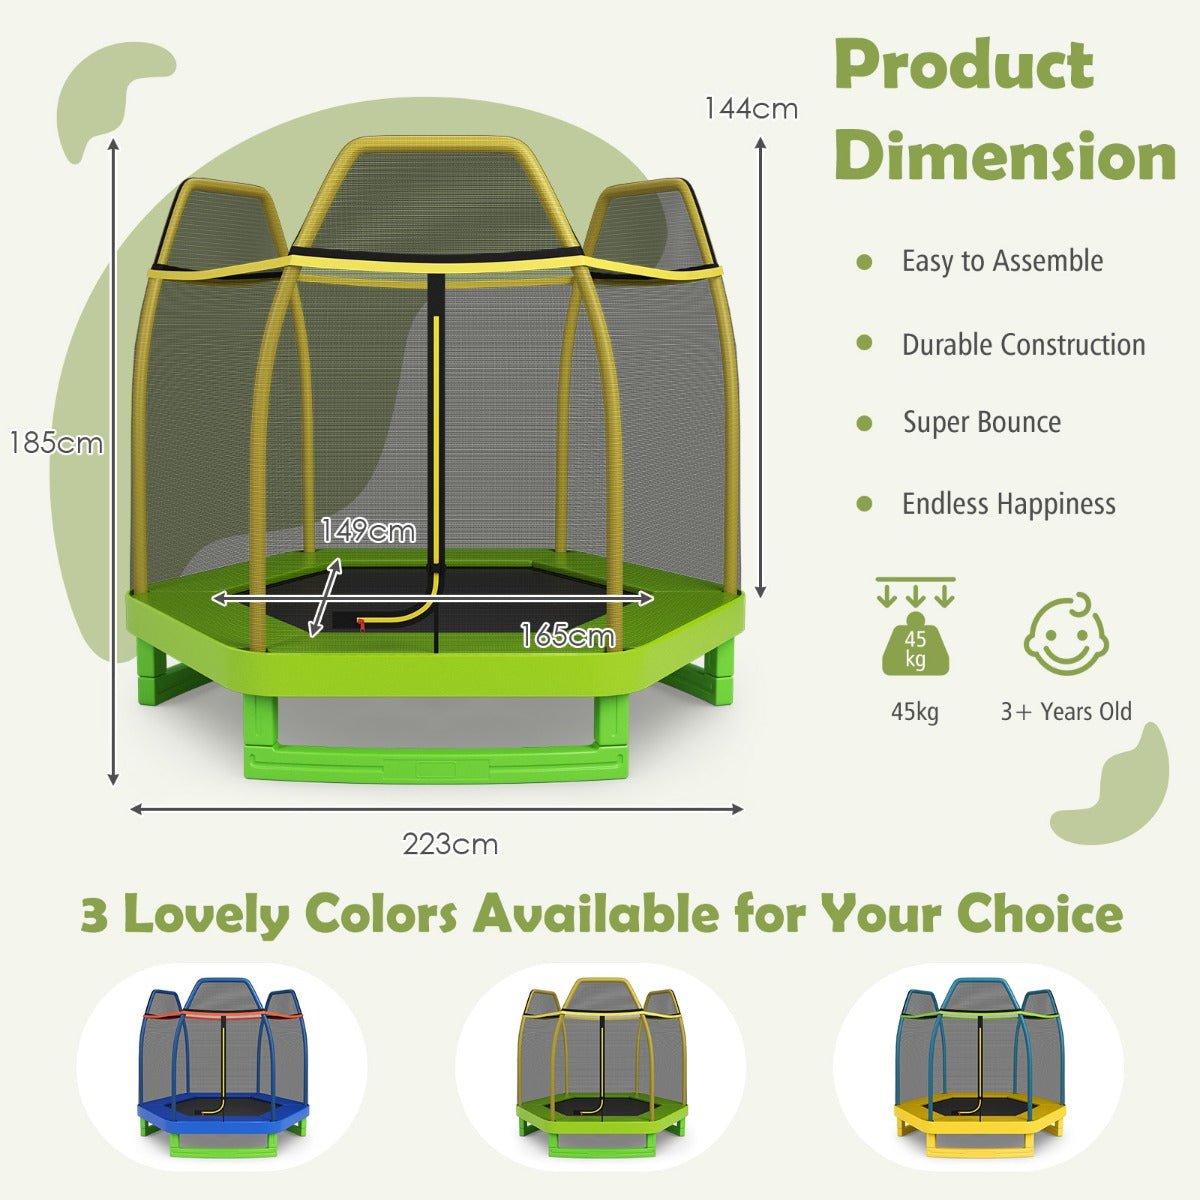 Bounce and Play: Kids Trampoline with Safety Enclosure Net for Outdoor Play Green